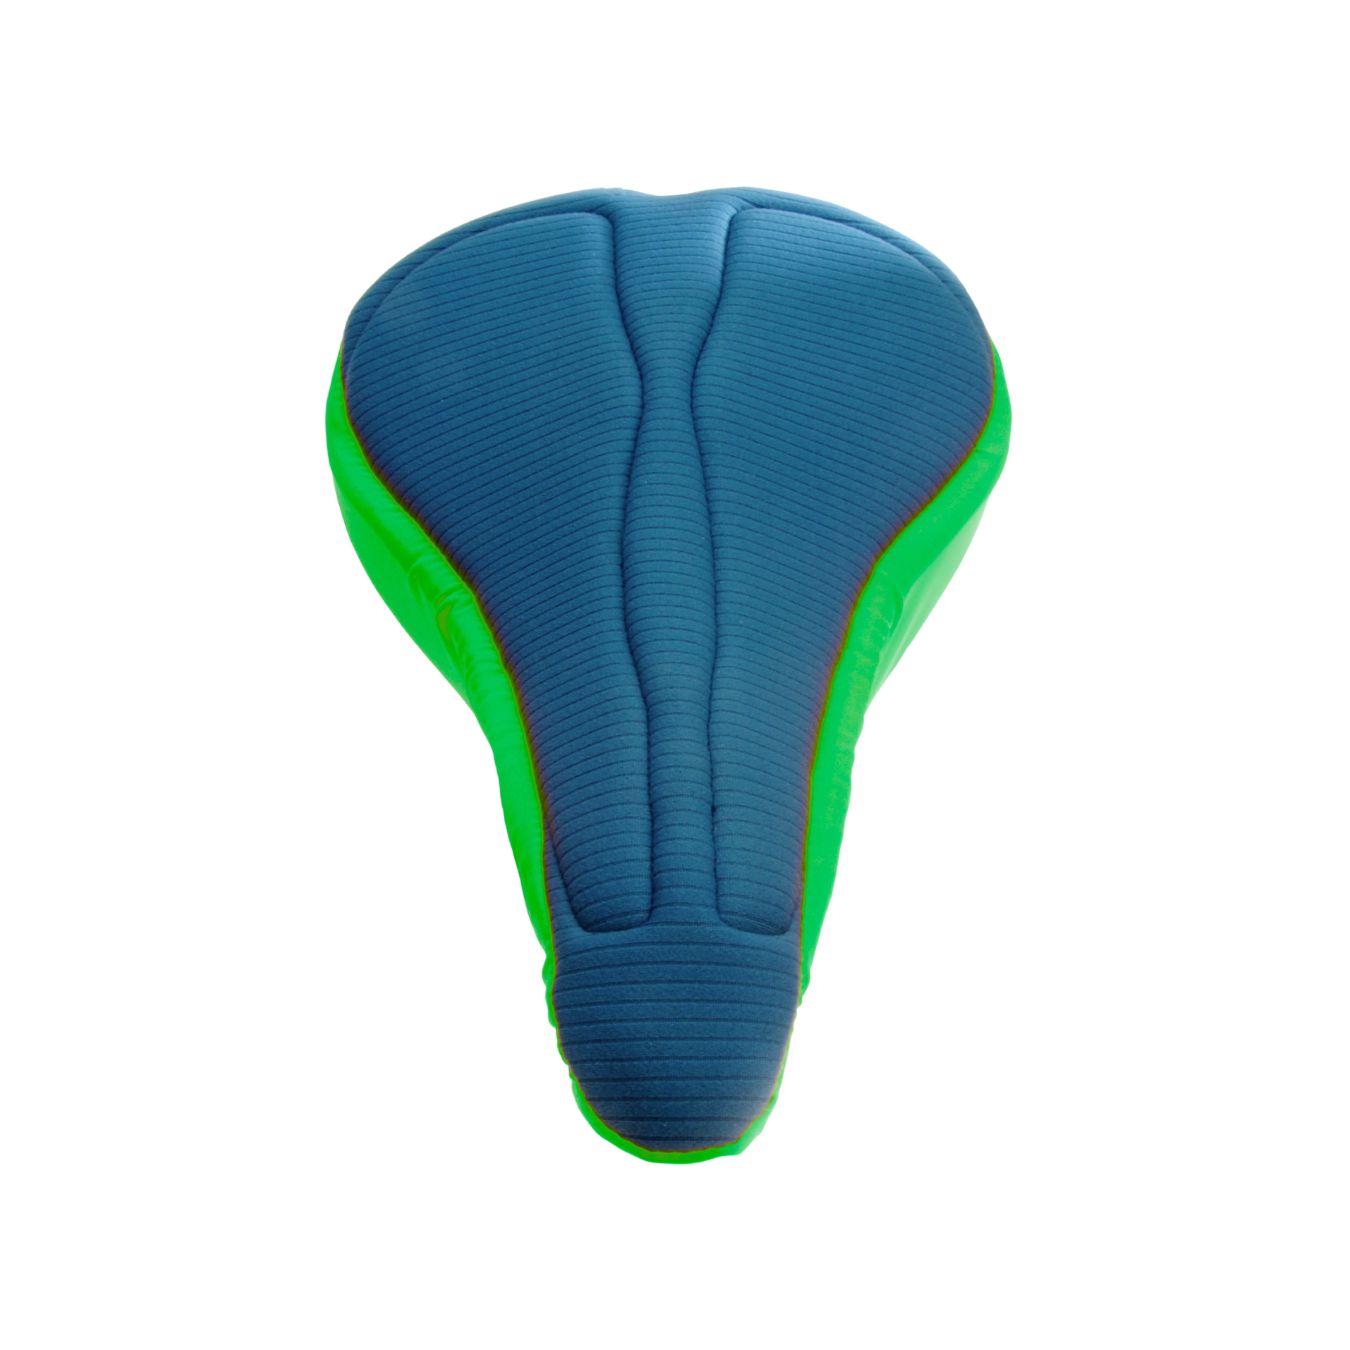 Blue_green_padded_bike_seat_cover_peloton_saddle_triathlontraining_by_pedalshed